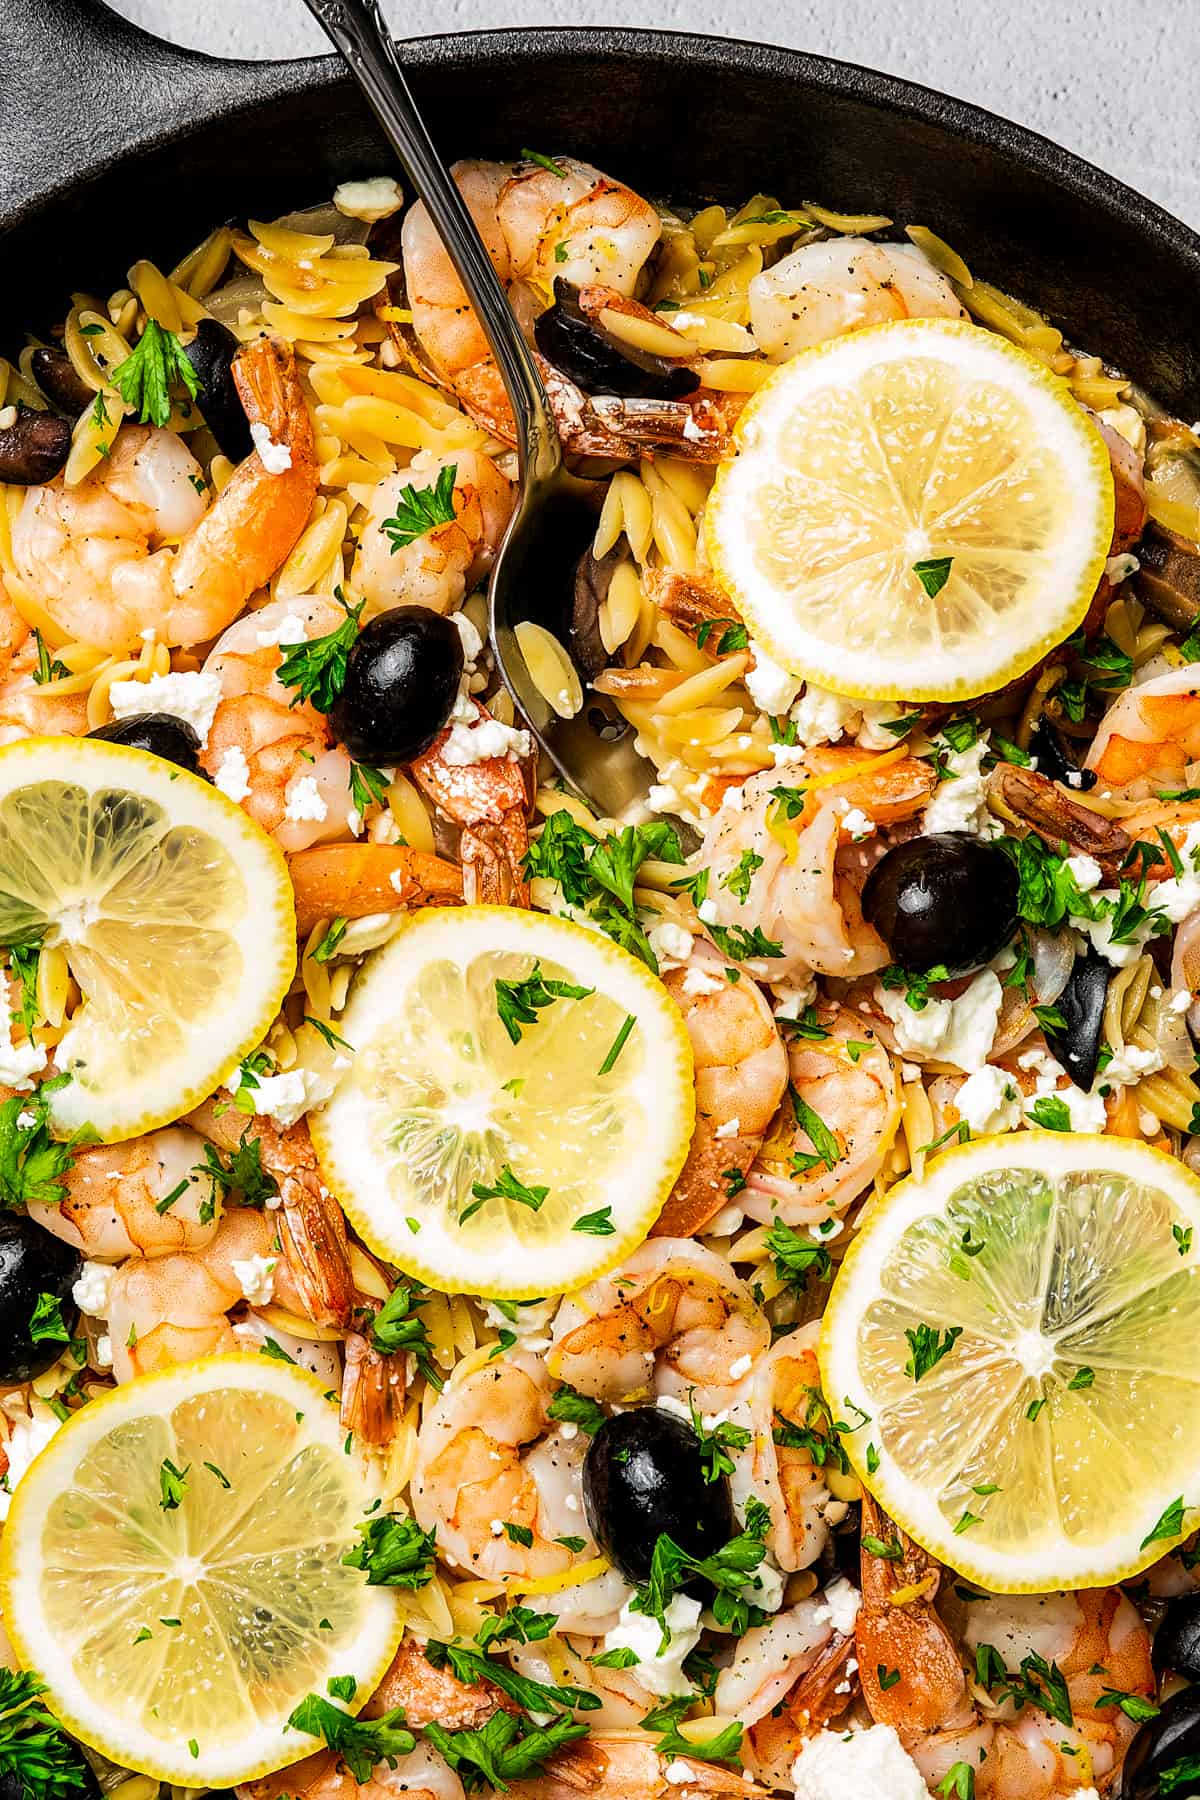 Close-up shot of lemon slices, cooked shrimp, and black olives on a bed of orzo.